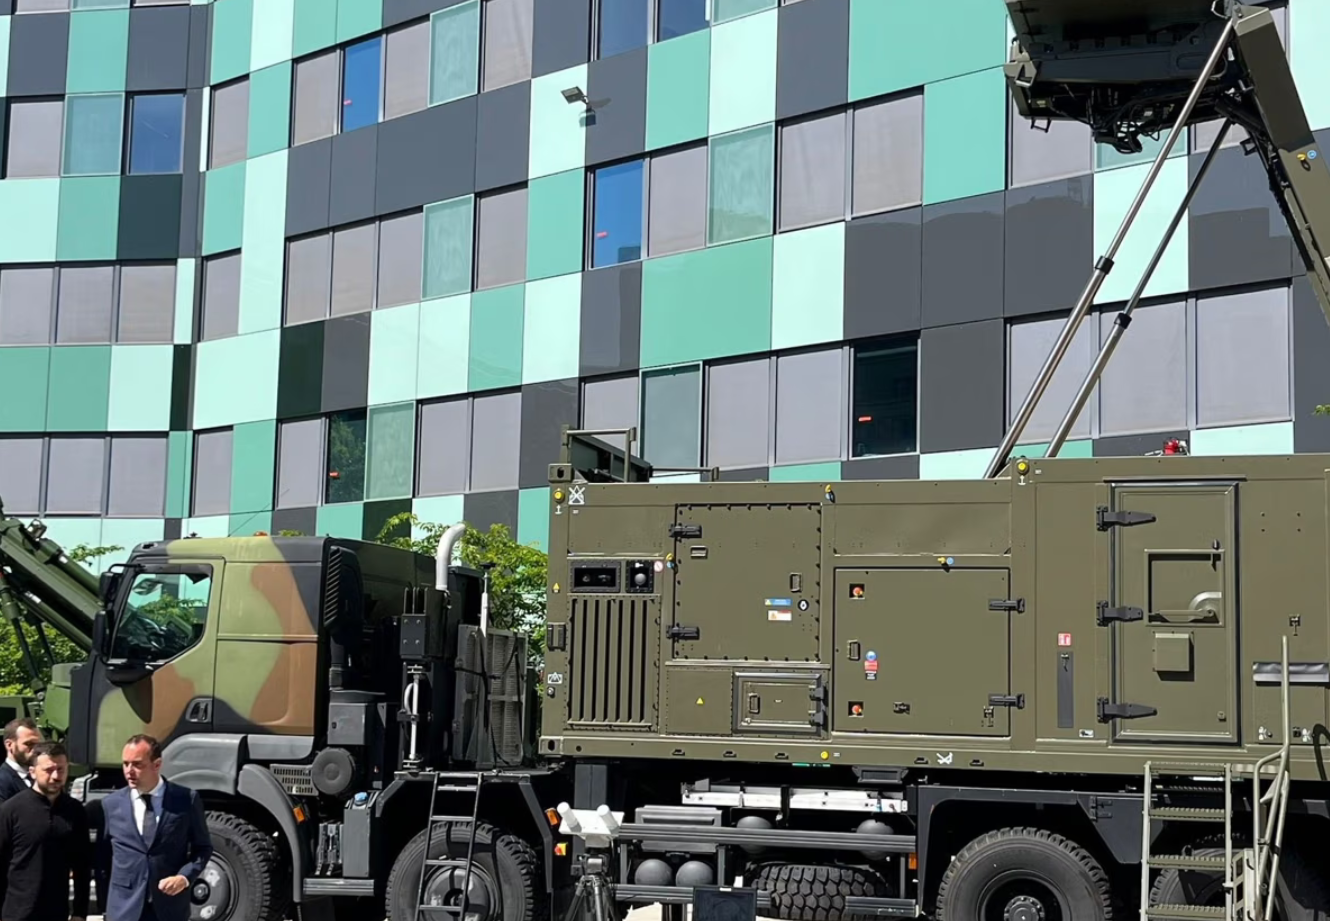 A Thales ControlMaster 200 is seen displayed in front of a building with window panes in gray, light green, and dark green colors. The system's truck is painted in deep green and brown camouflage colors. Ukrainian president Volodymyr Zelenskyy is seen walking on the bottom left side of the image with two other people wearing suits.